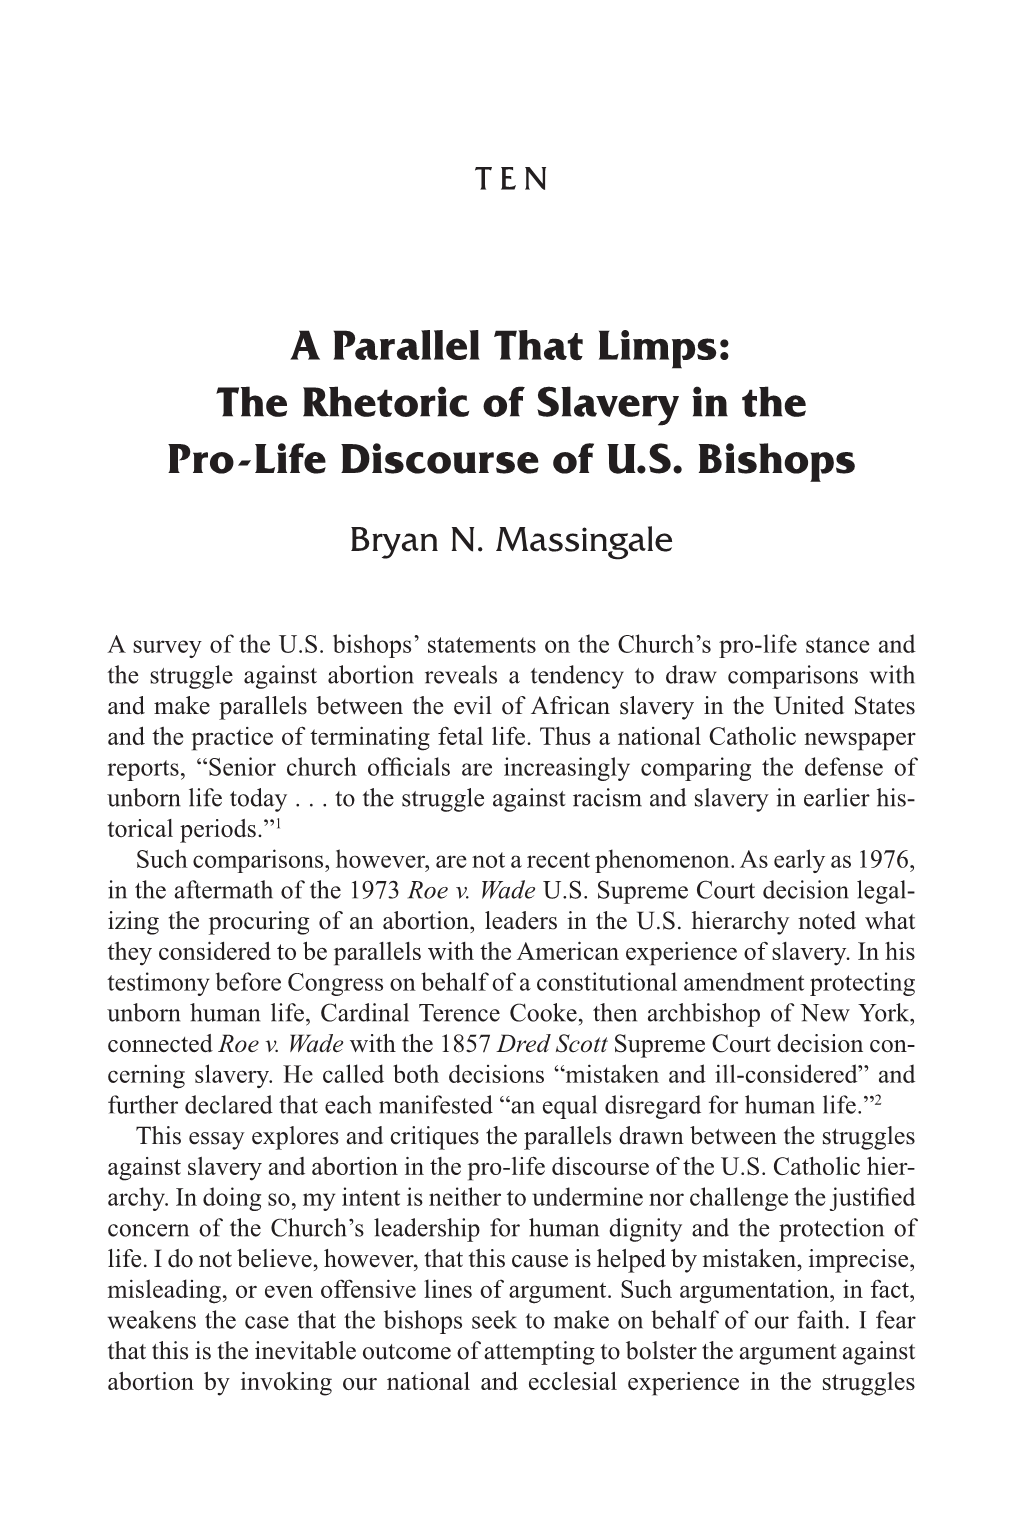 The Rhetoric of Slavery in the Pro-Life Discourse of Us Bishops